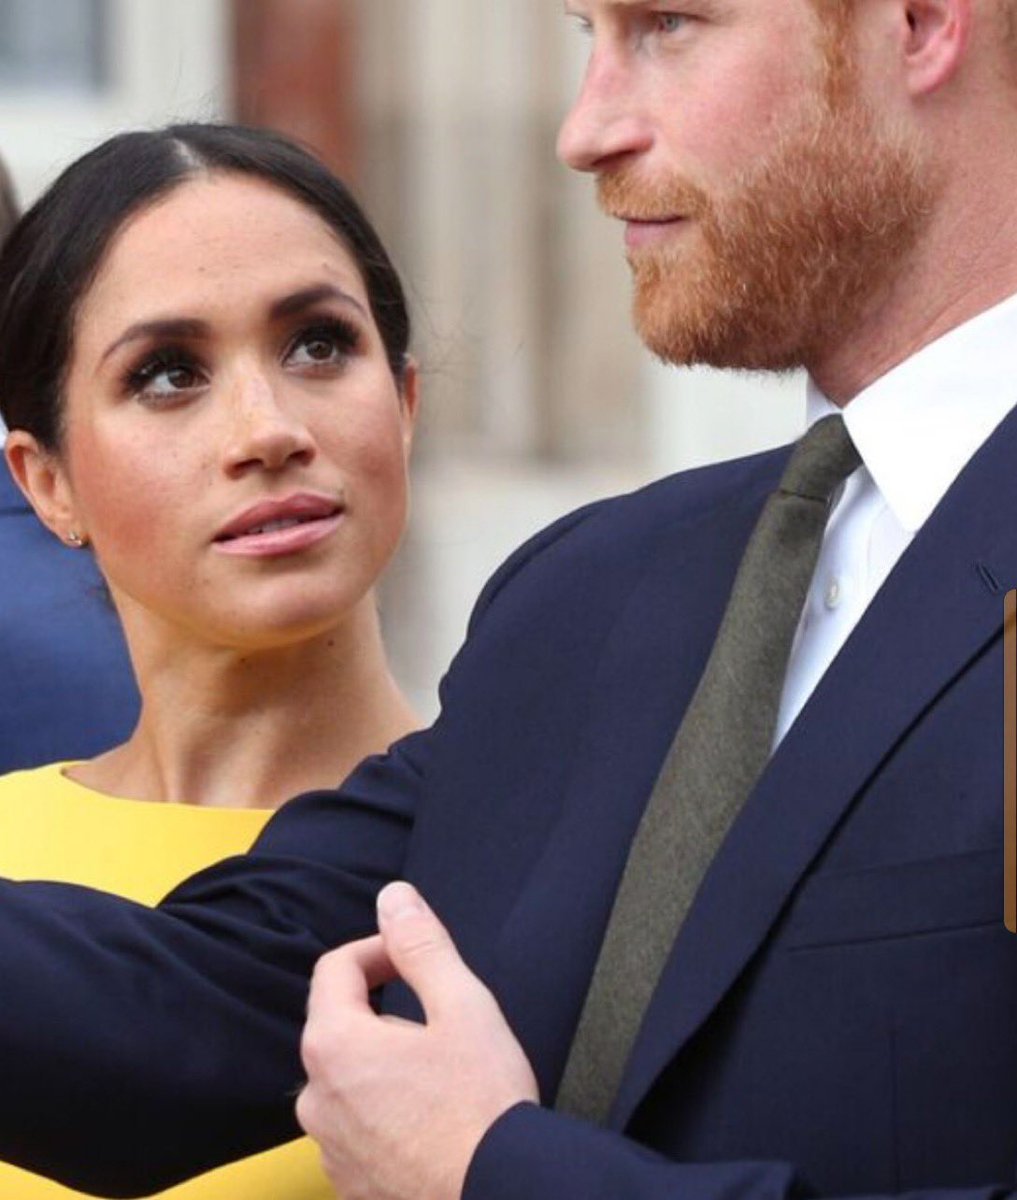 Squawks busy criticizing PC and PW that withstand many hardships throughout their 20yr relationship. When they need to be worried that their fave hypocrites will not survive the 7yr. Itch 😂#MeghanAndHarrySmollett #HarryAndMeghanAreFinished #HarryDivorceMeghan #HarryandMeghan